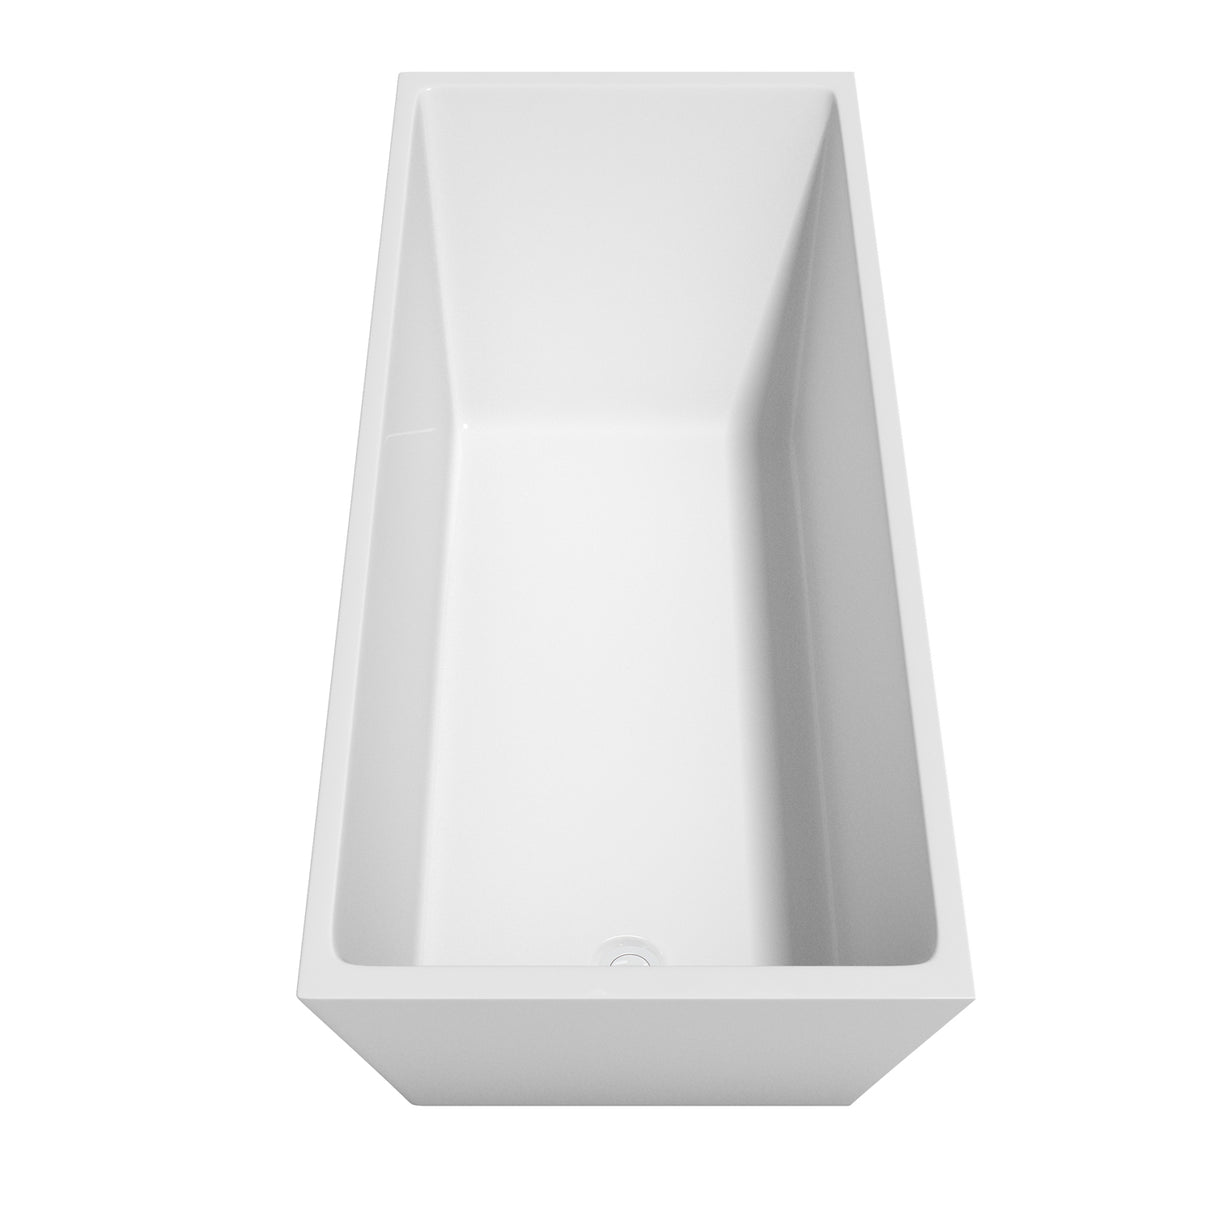 Hannah 67 Inch Freestanding Bathtub in White with Shiny White Trim and Floor Mounted Faucet in Matte Black